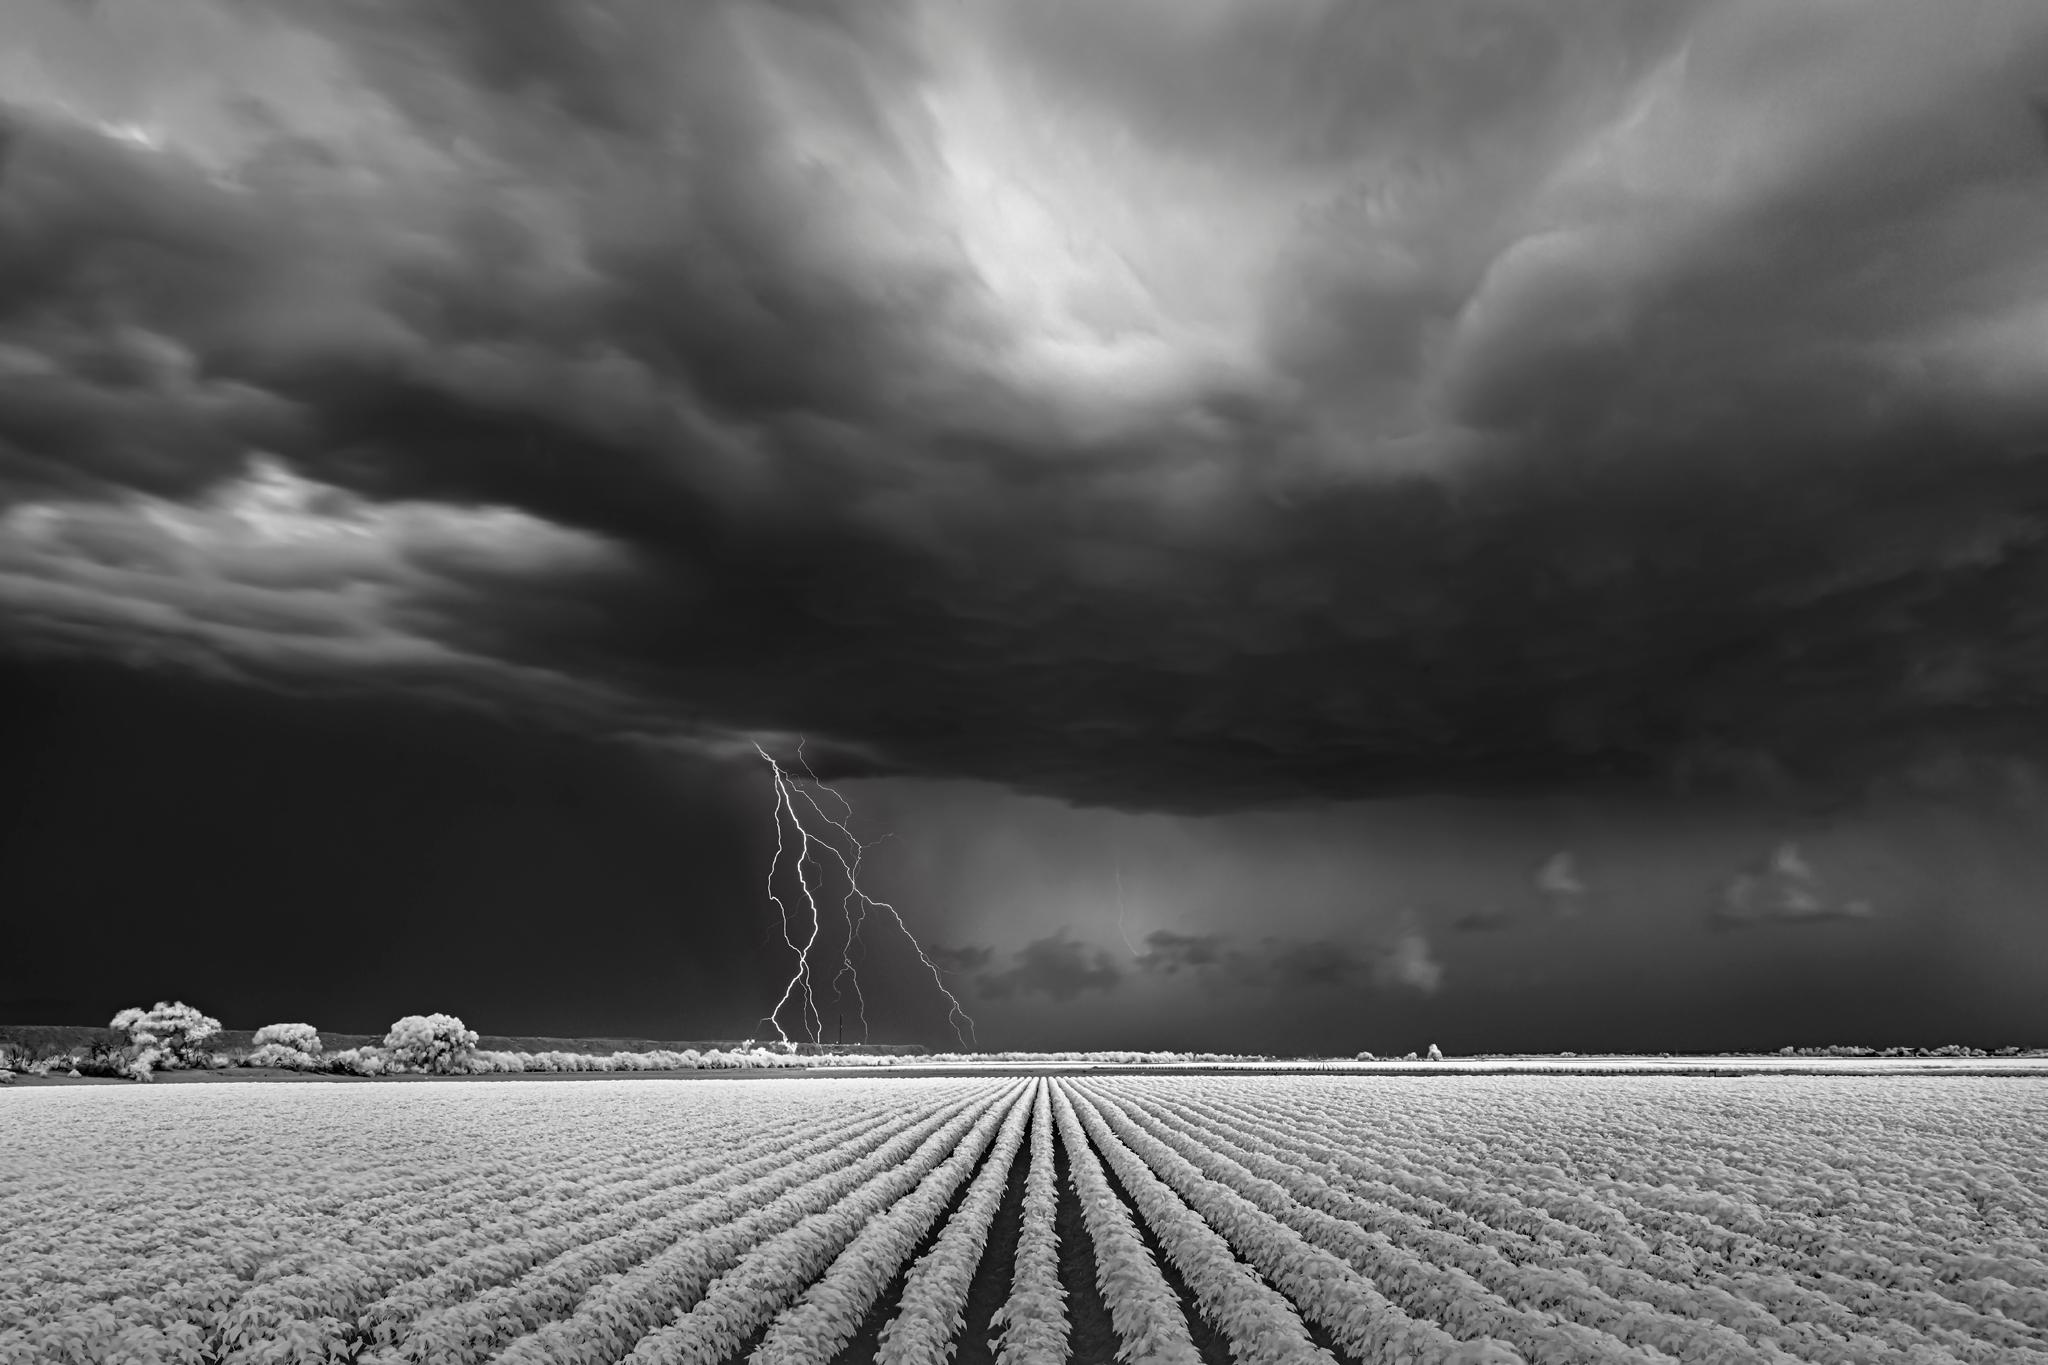 Mitch Dobrowner Landscape Photograph - Lightning/Cotton Field, limited edition photograph, archival, signed 